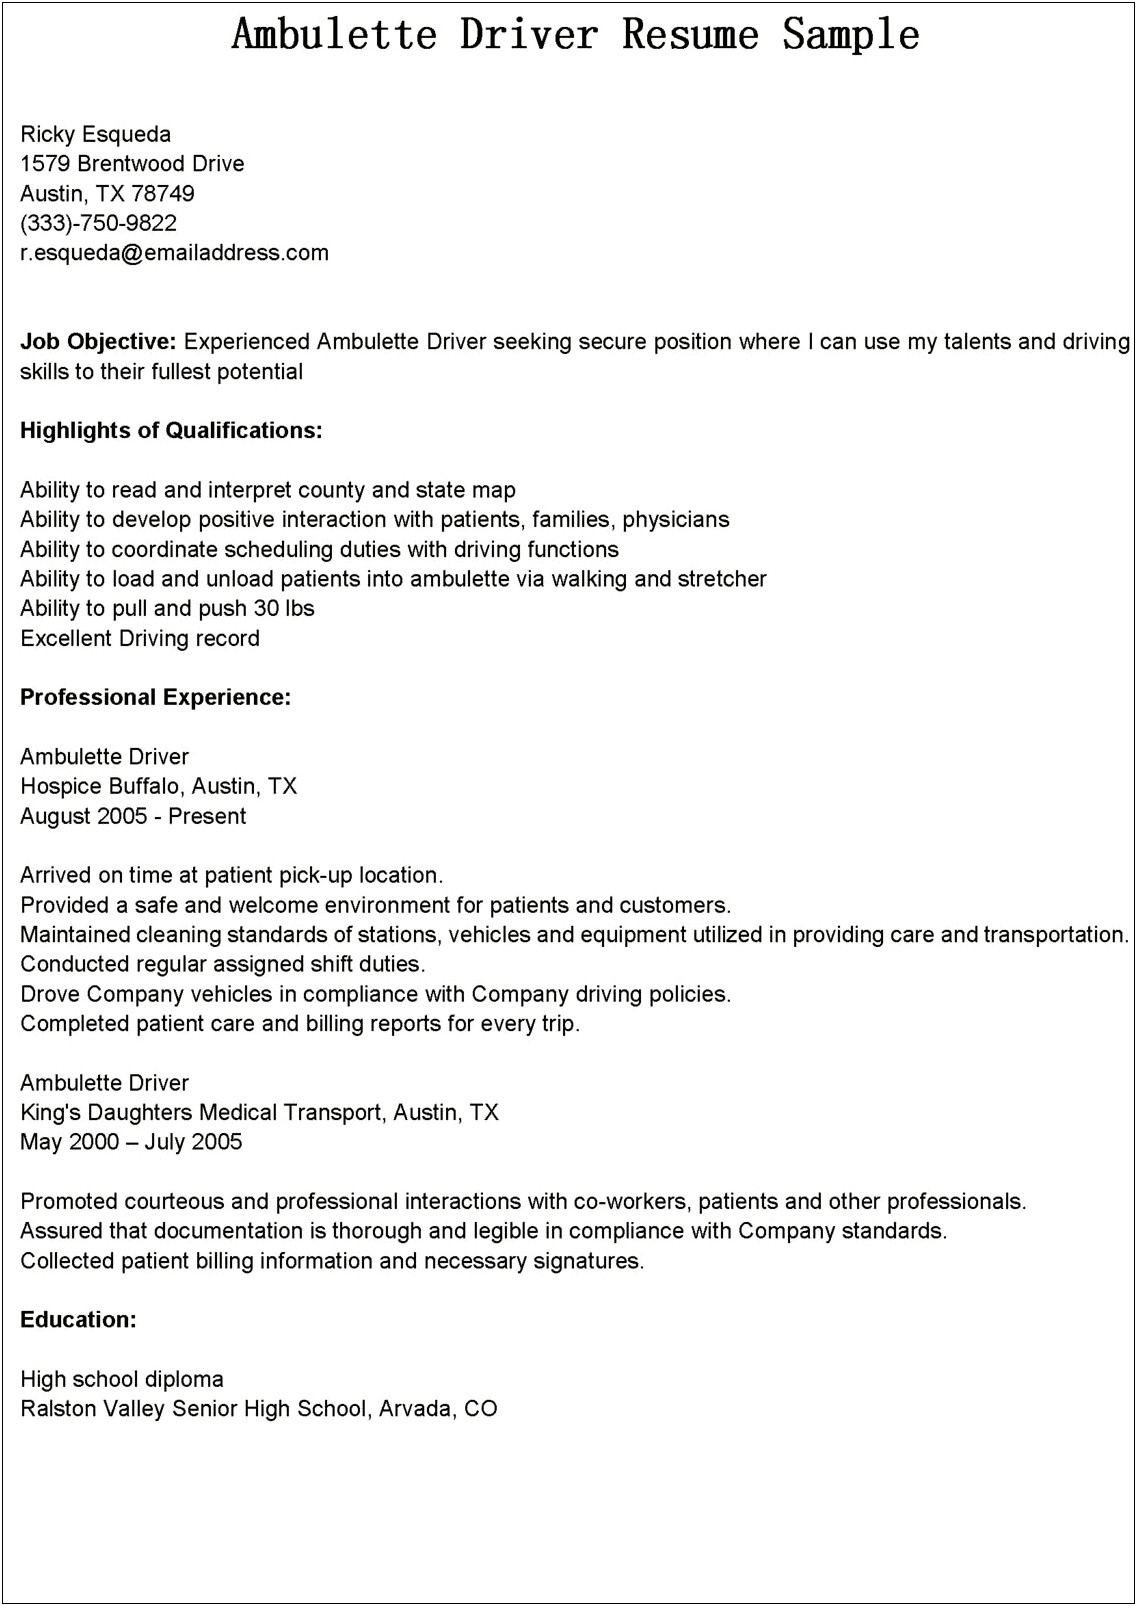 Resume Objective For Respiratory Therapist